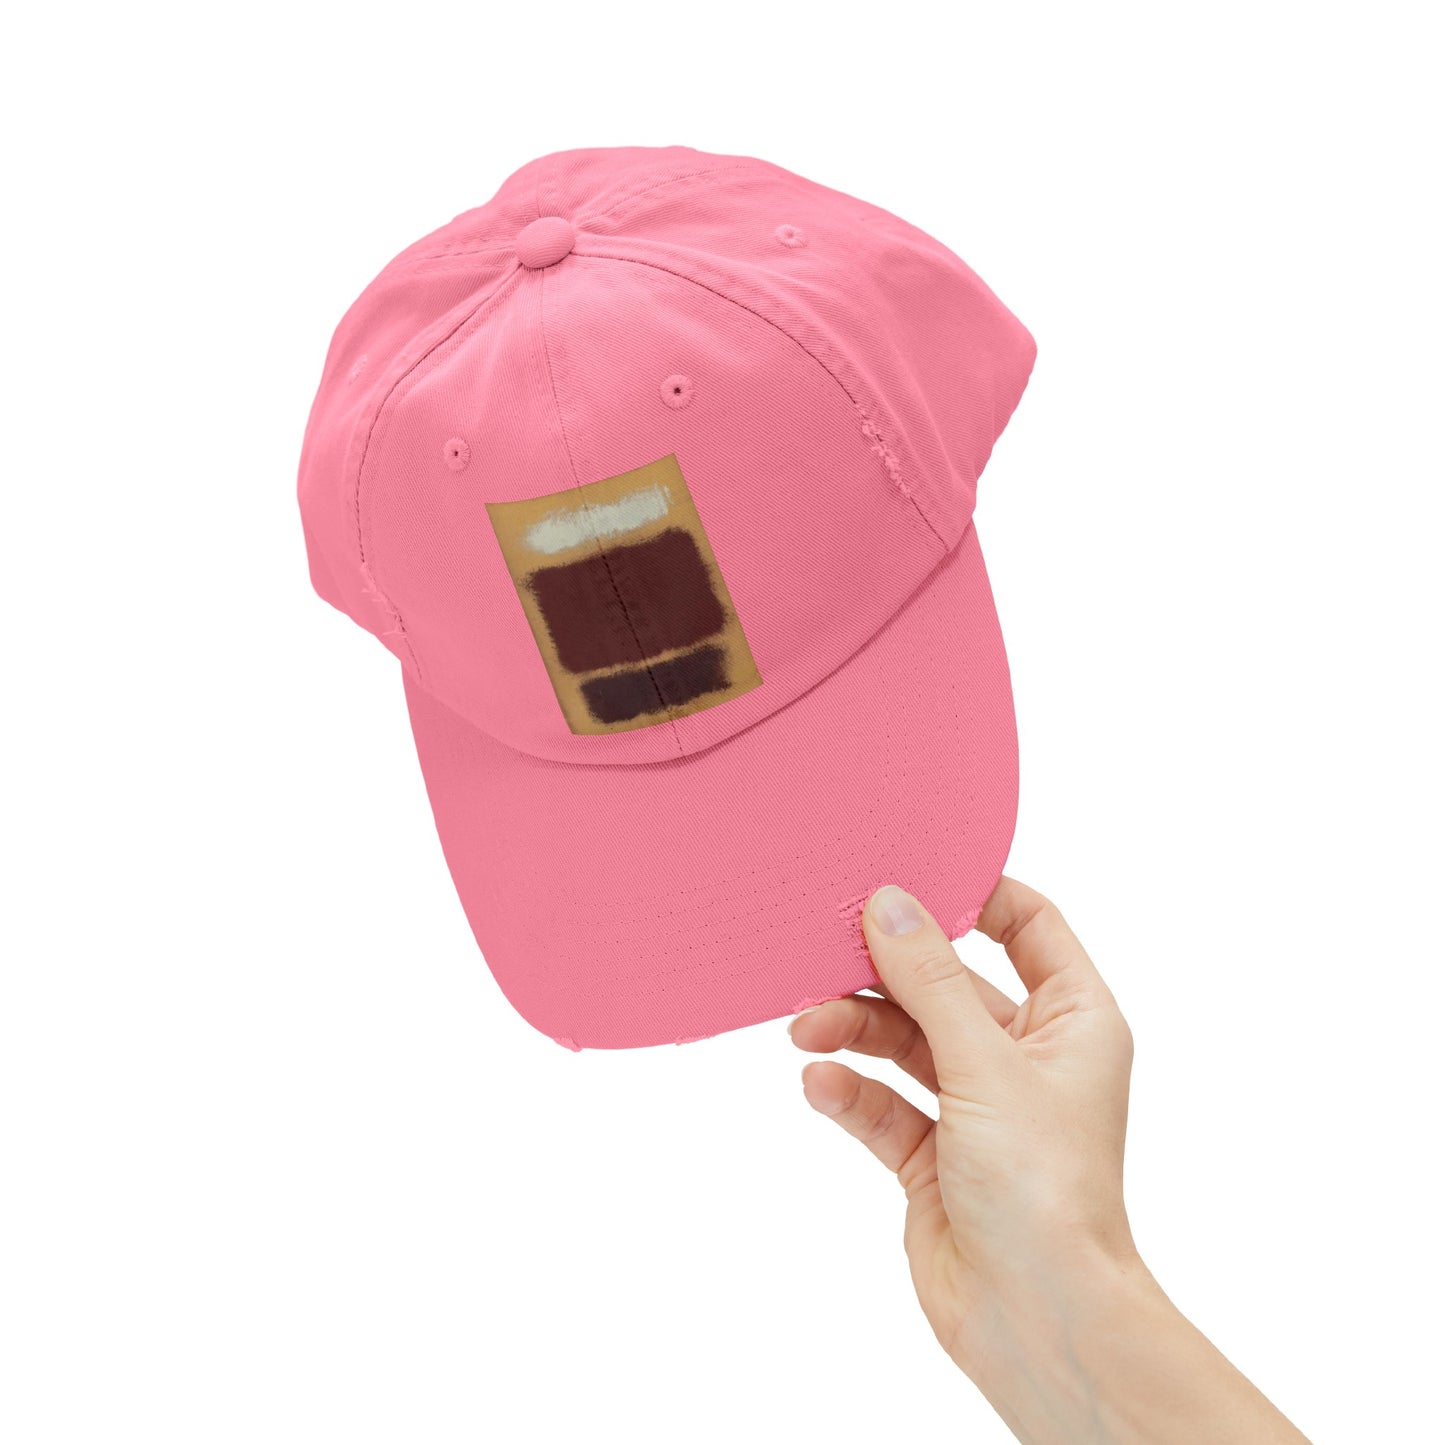 a person holding a pink hat with a brown patch on it